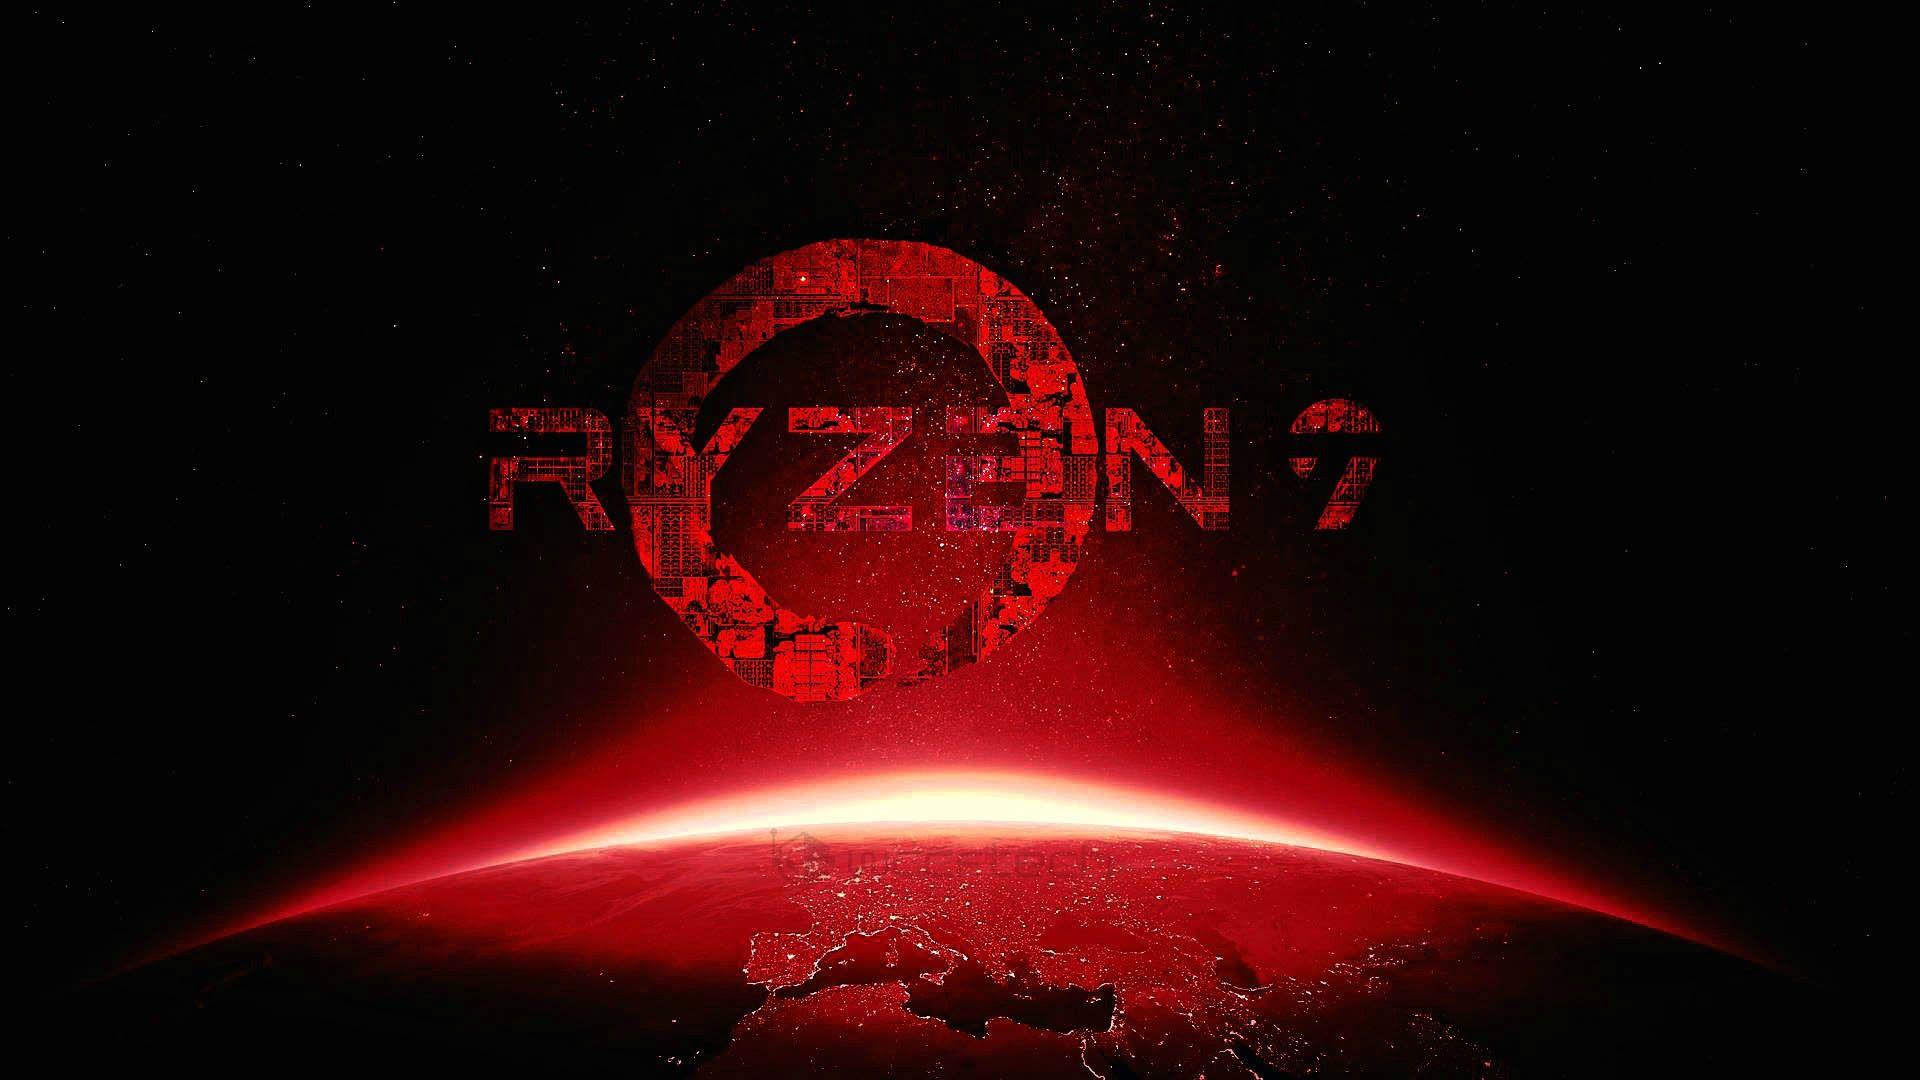 Full AMD Ryzen 9 Threadripper Lineup Leaked, up to 16 Cores & 4.1GHz